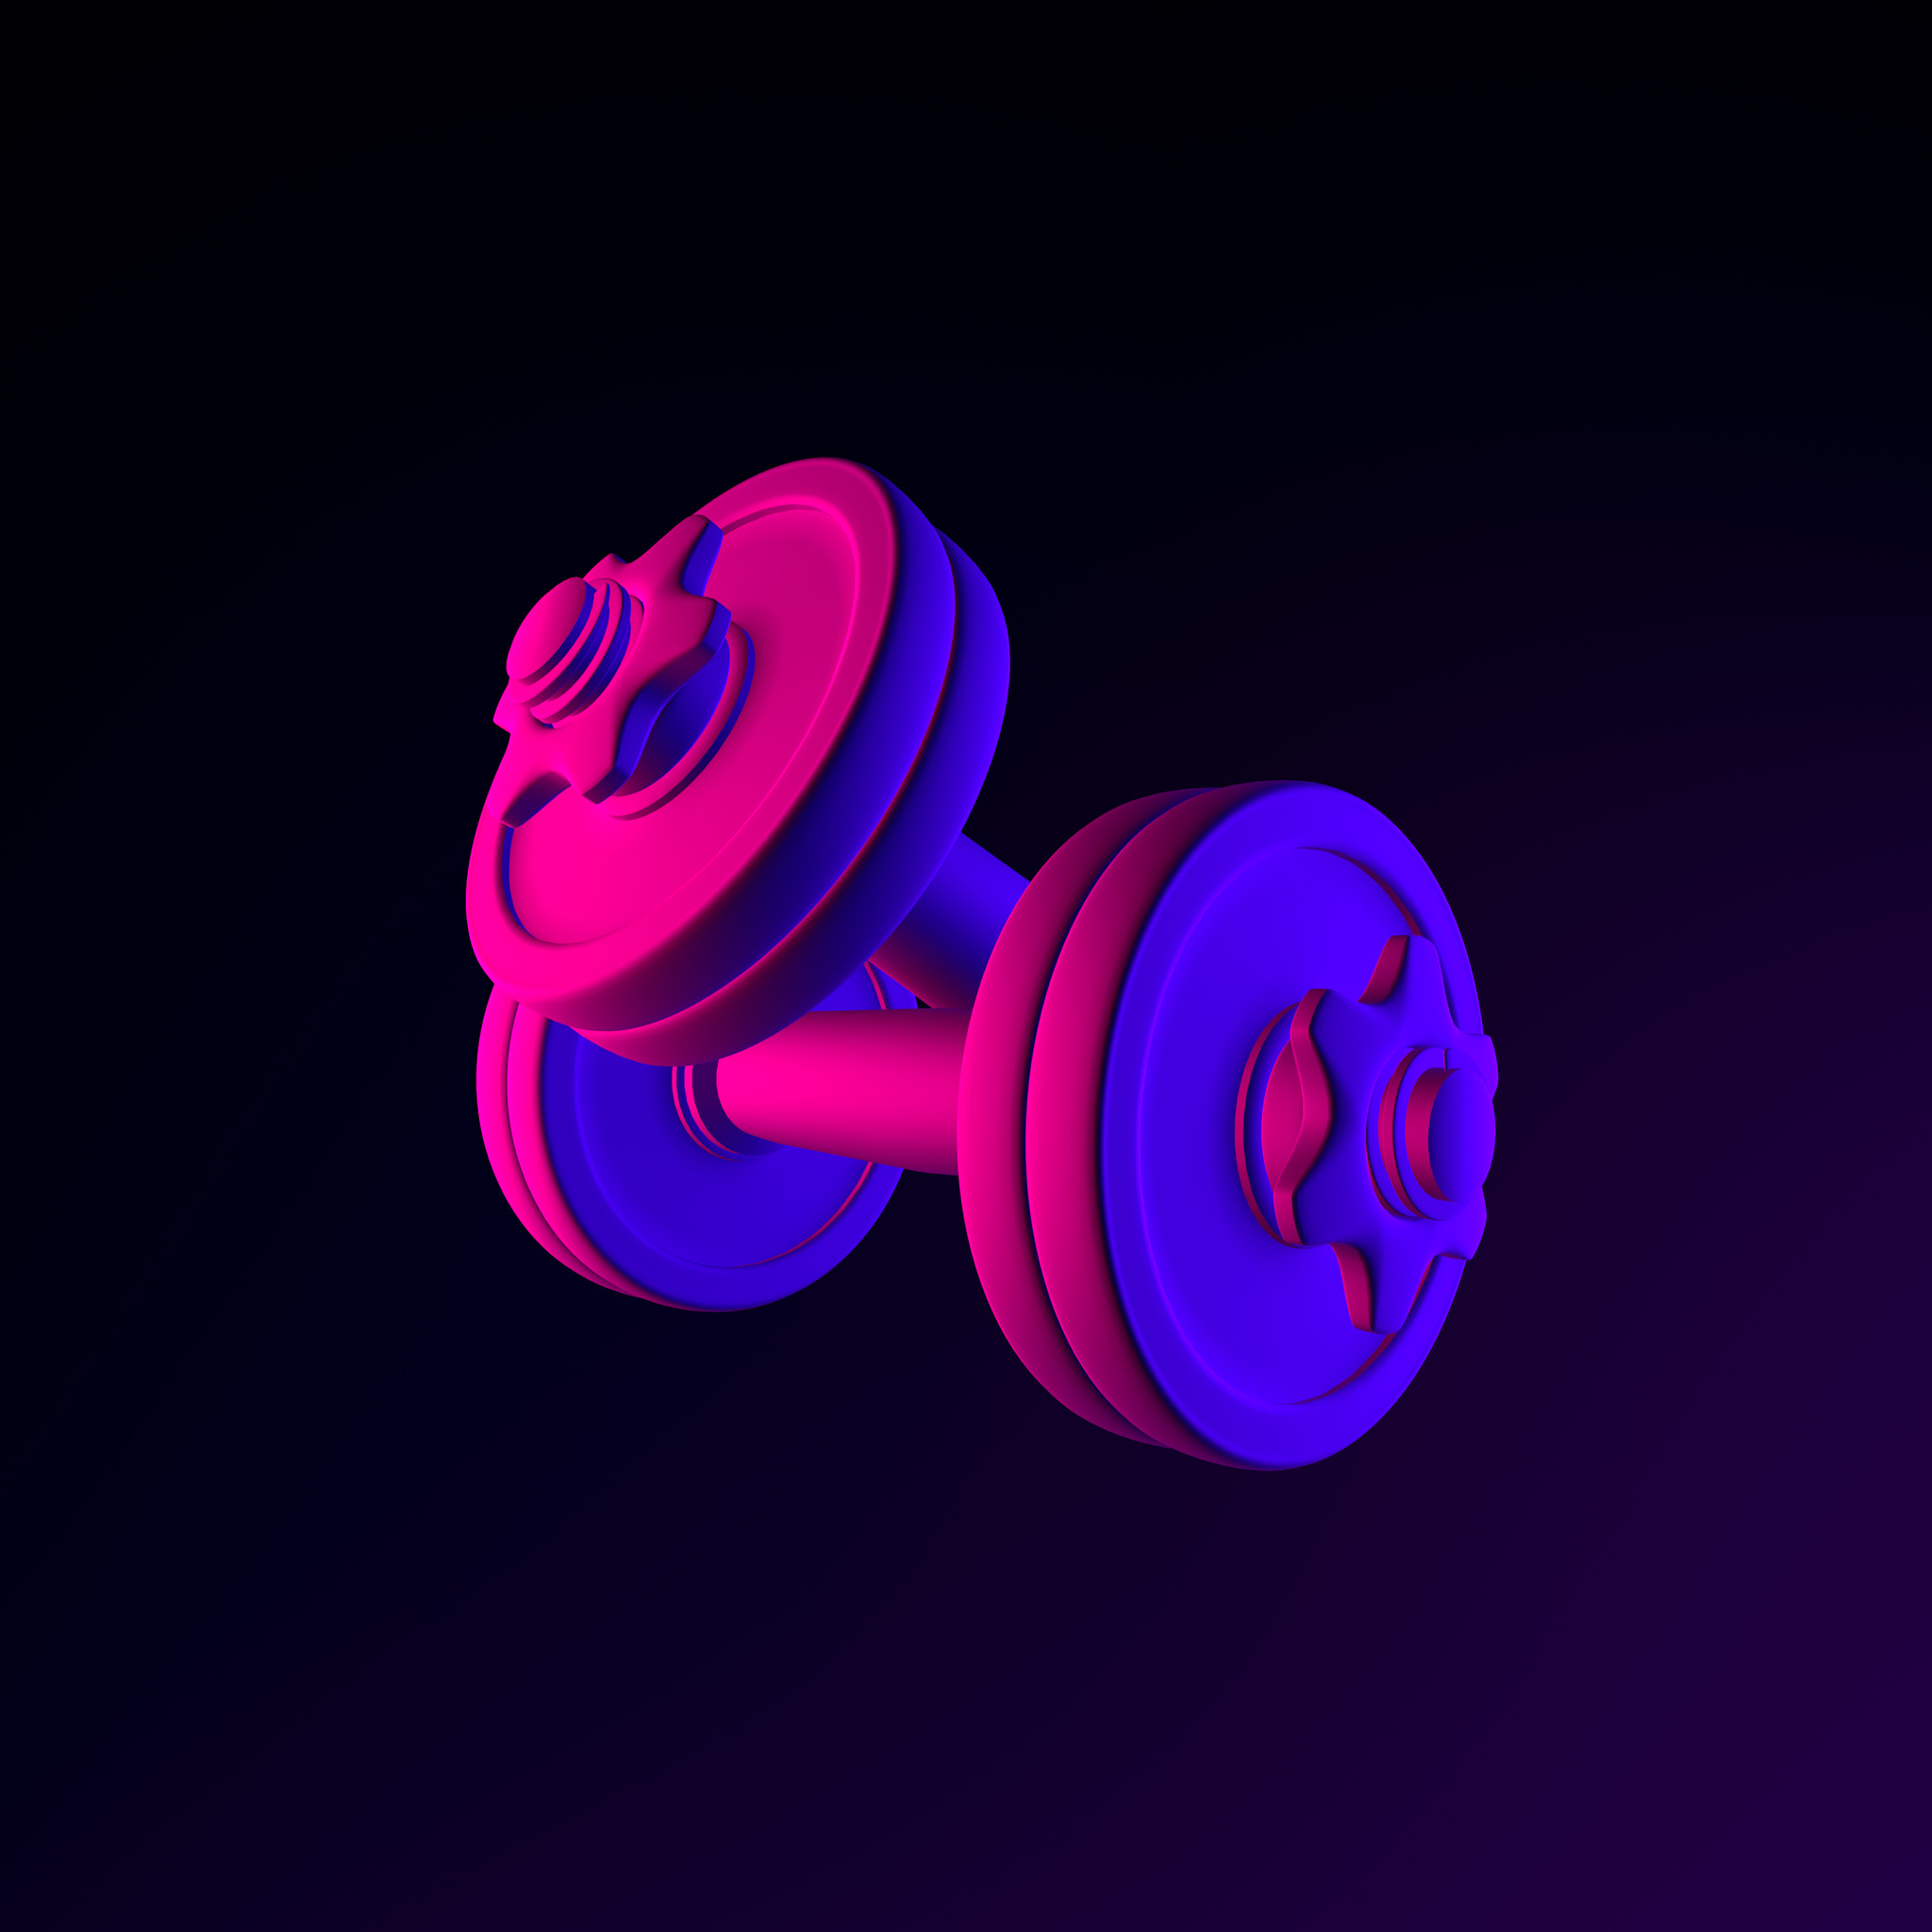 Neon dumbbell icon. 3d rendering interface ui ux element. Dark glowing symbol.